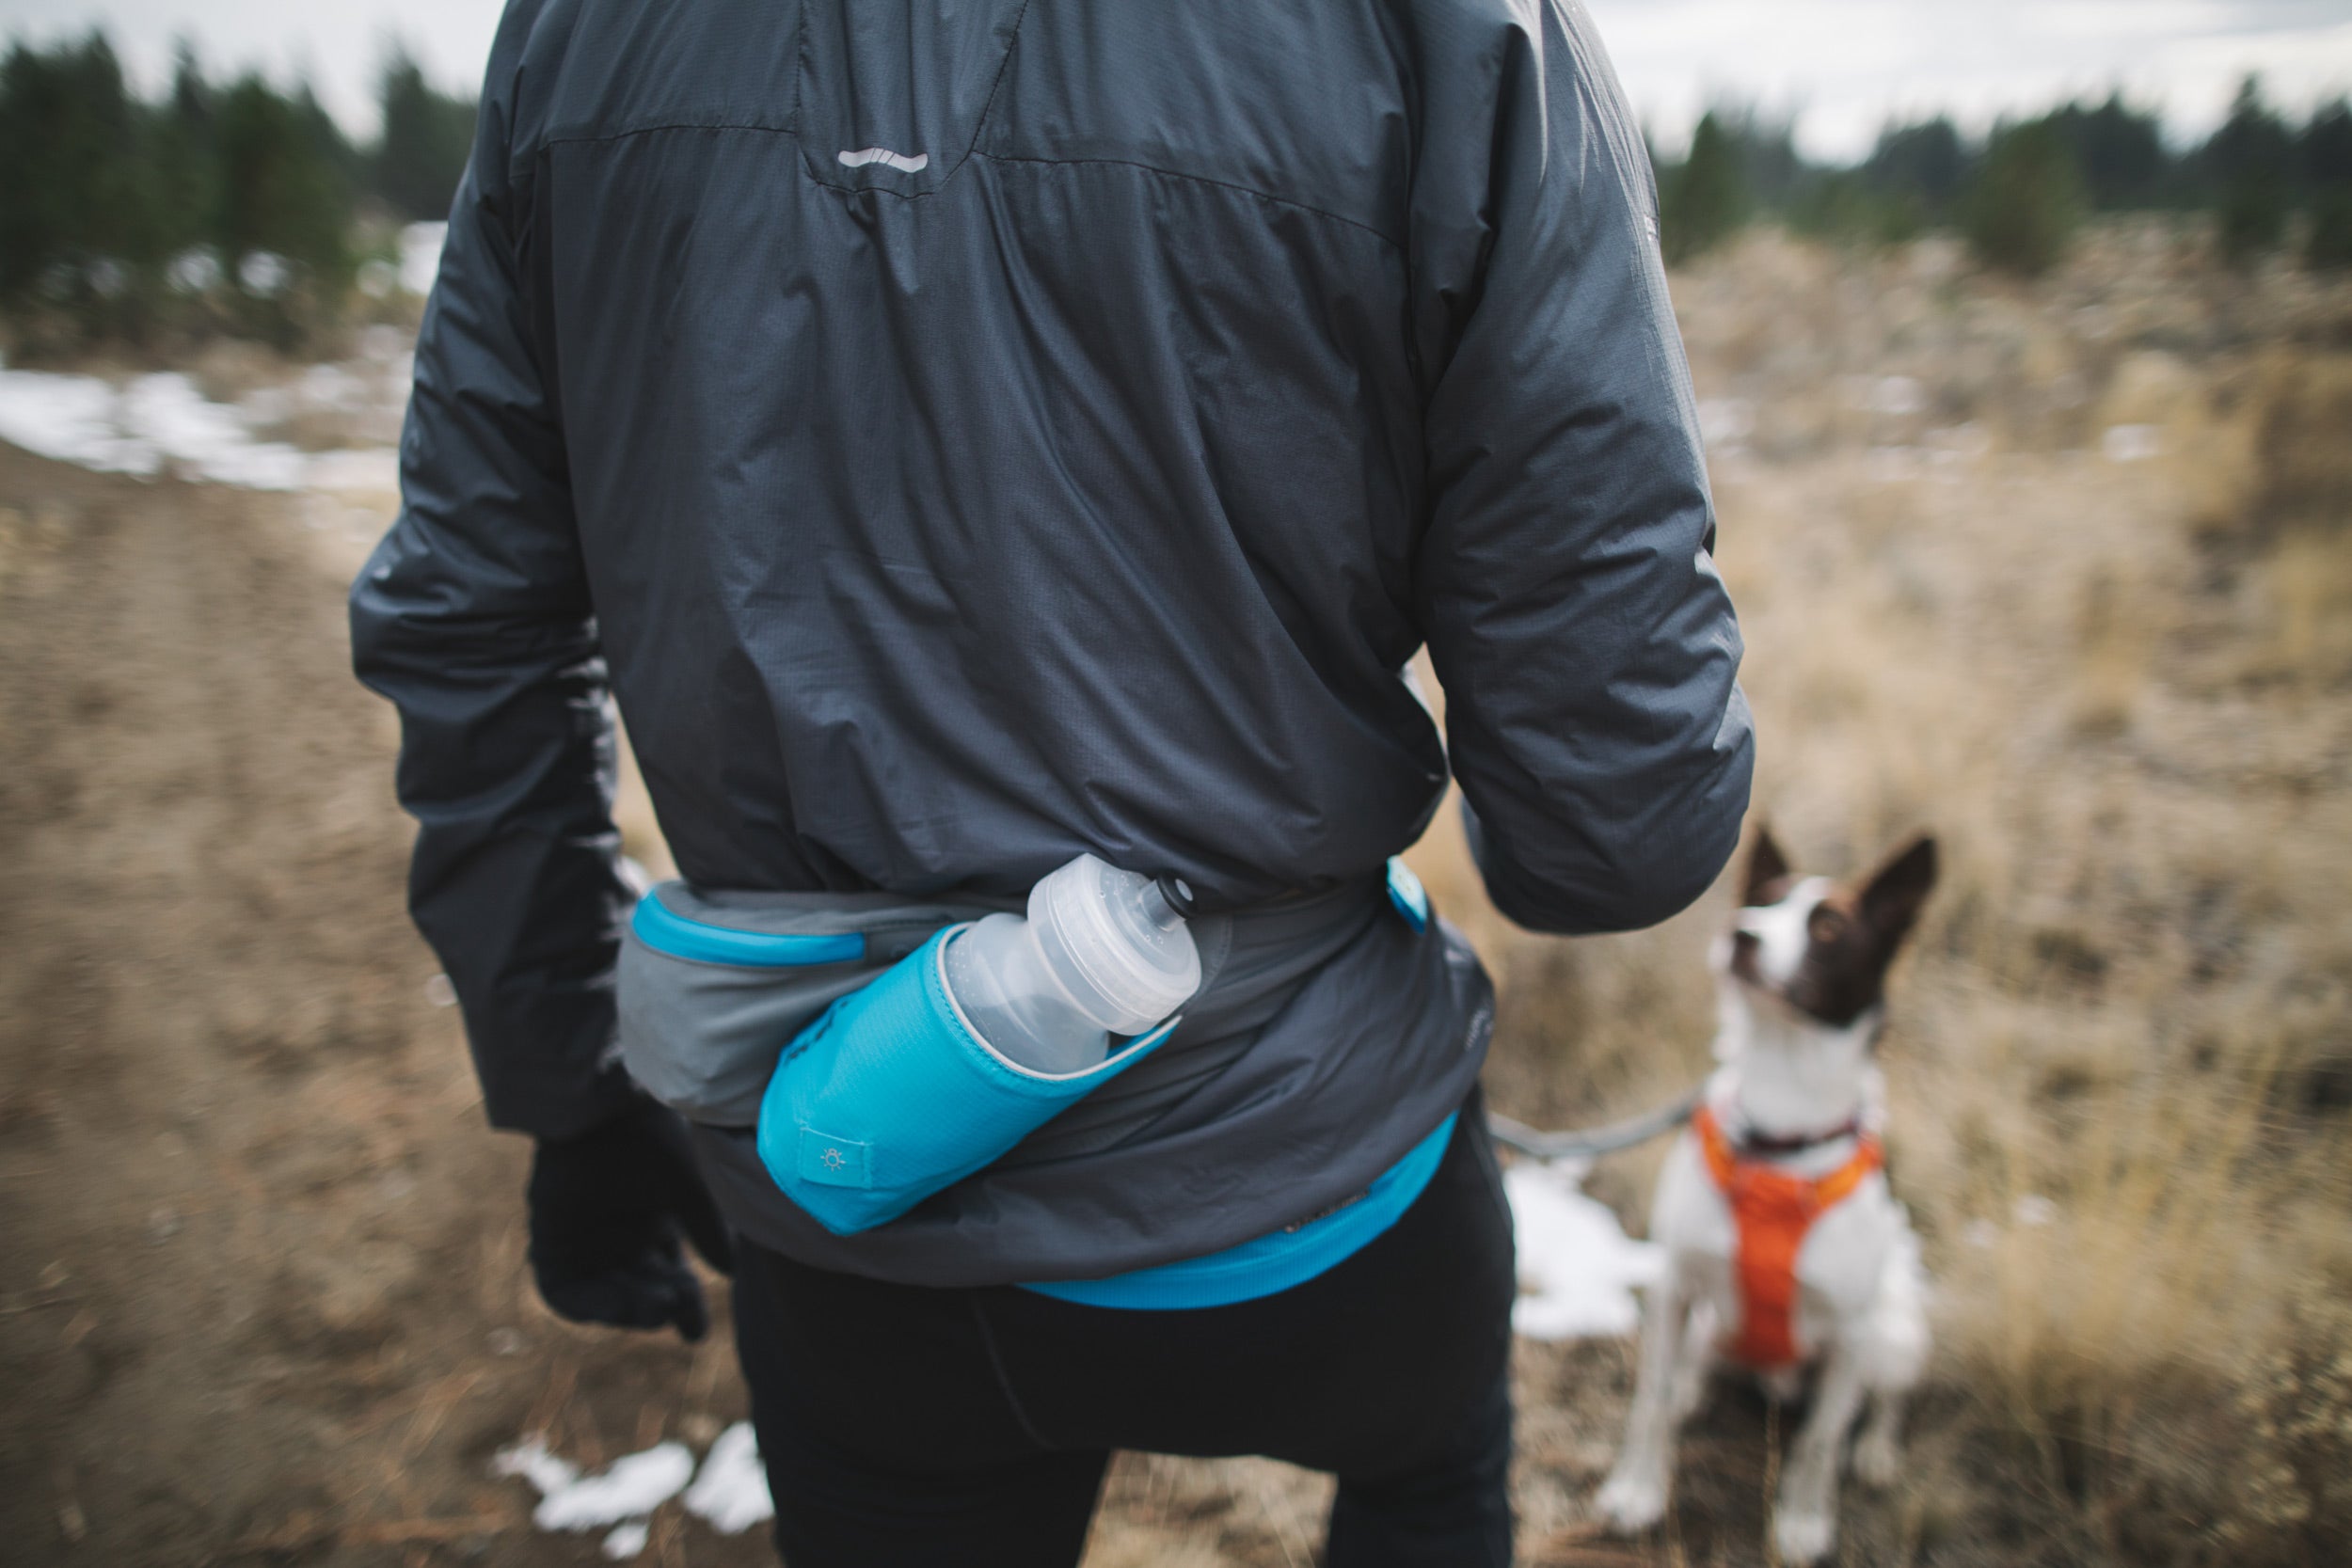 When out on a run with Jake, Timothy carries his essentials — keys, cell phone, snacks — in the Trail Runner Belt, part of Ruffwear's new Trail Runner System.